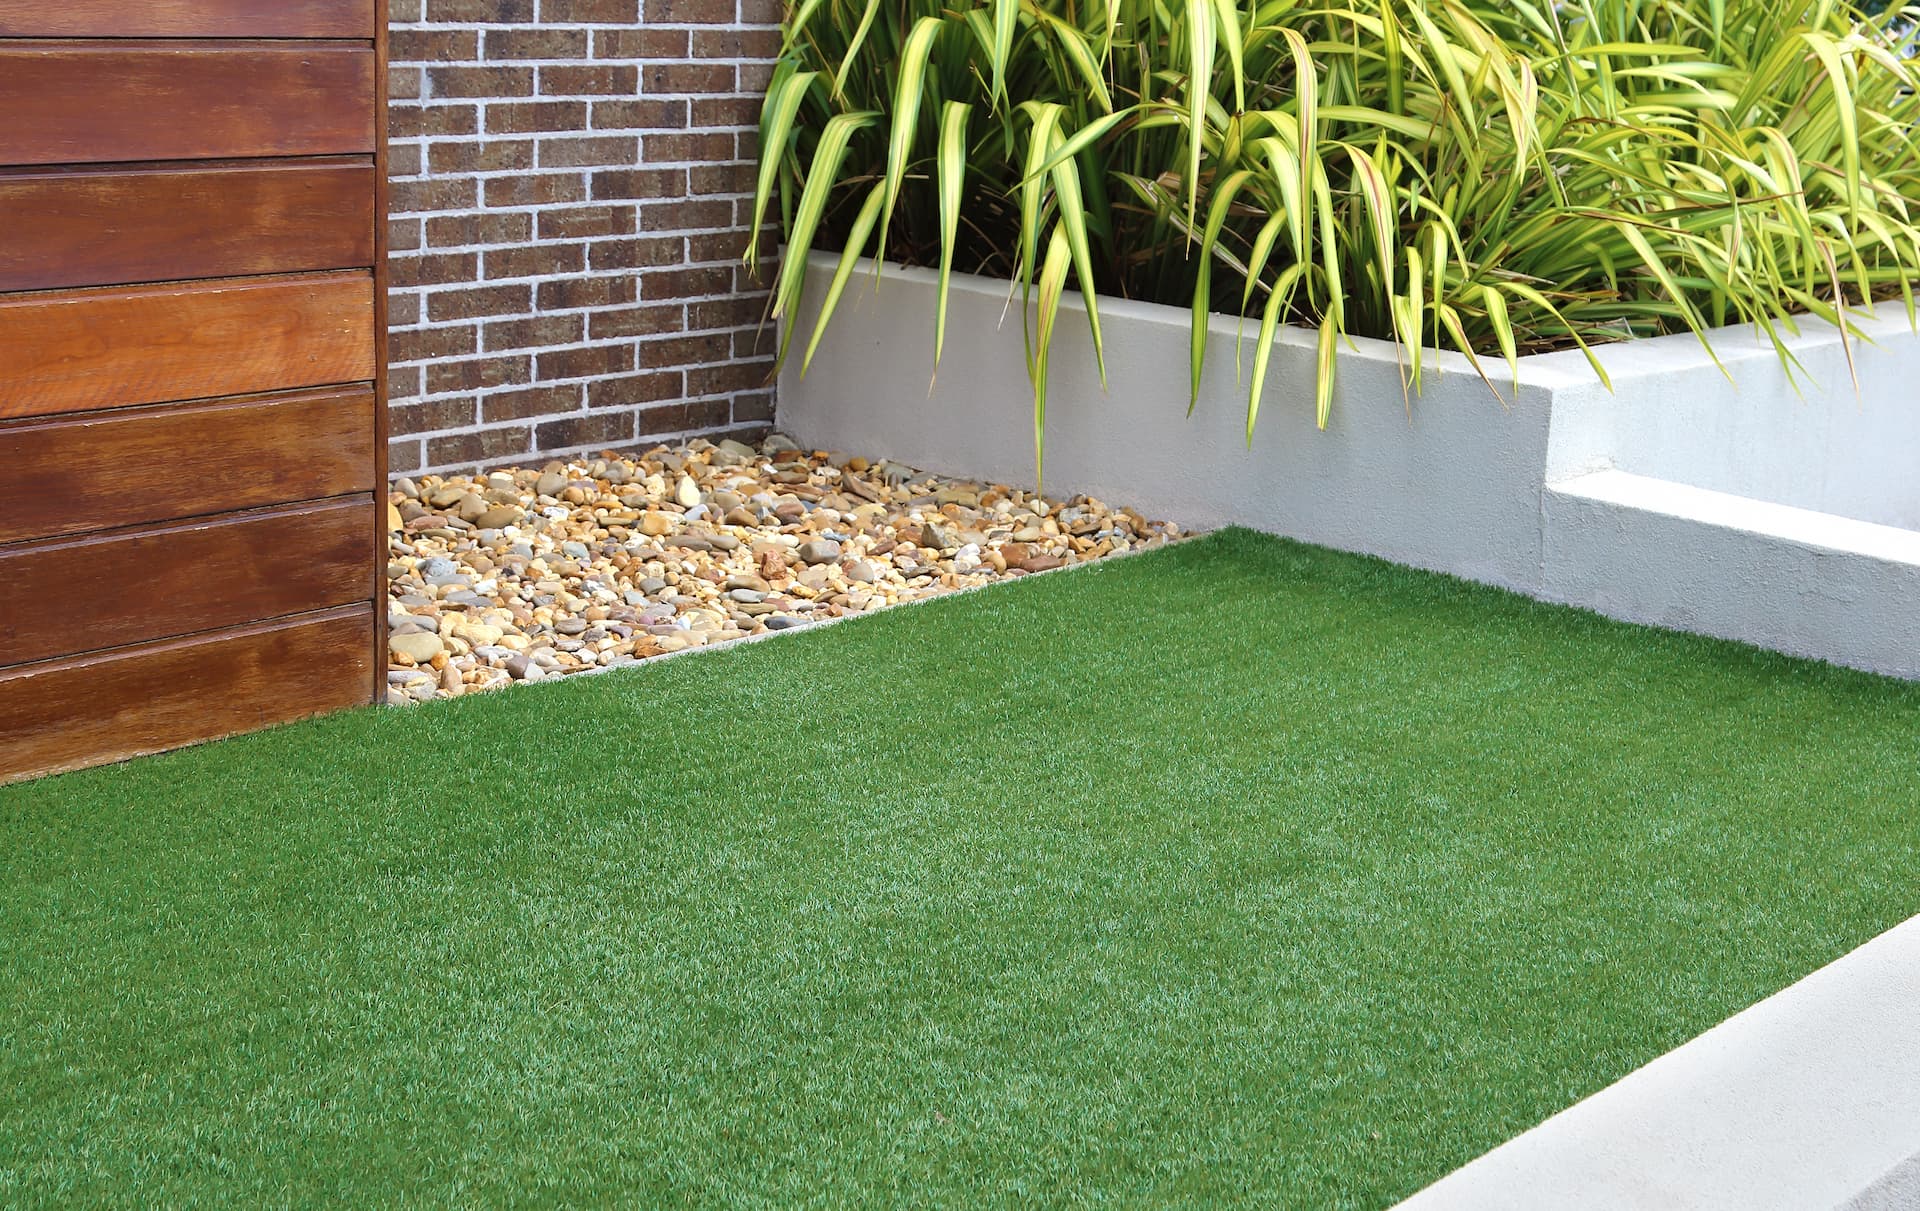 Licenced Artificial Grass & Turf services in Cheadle